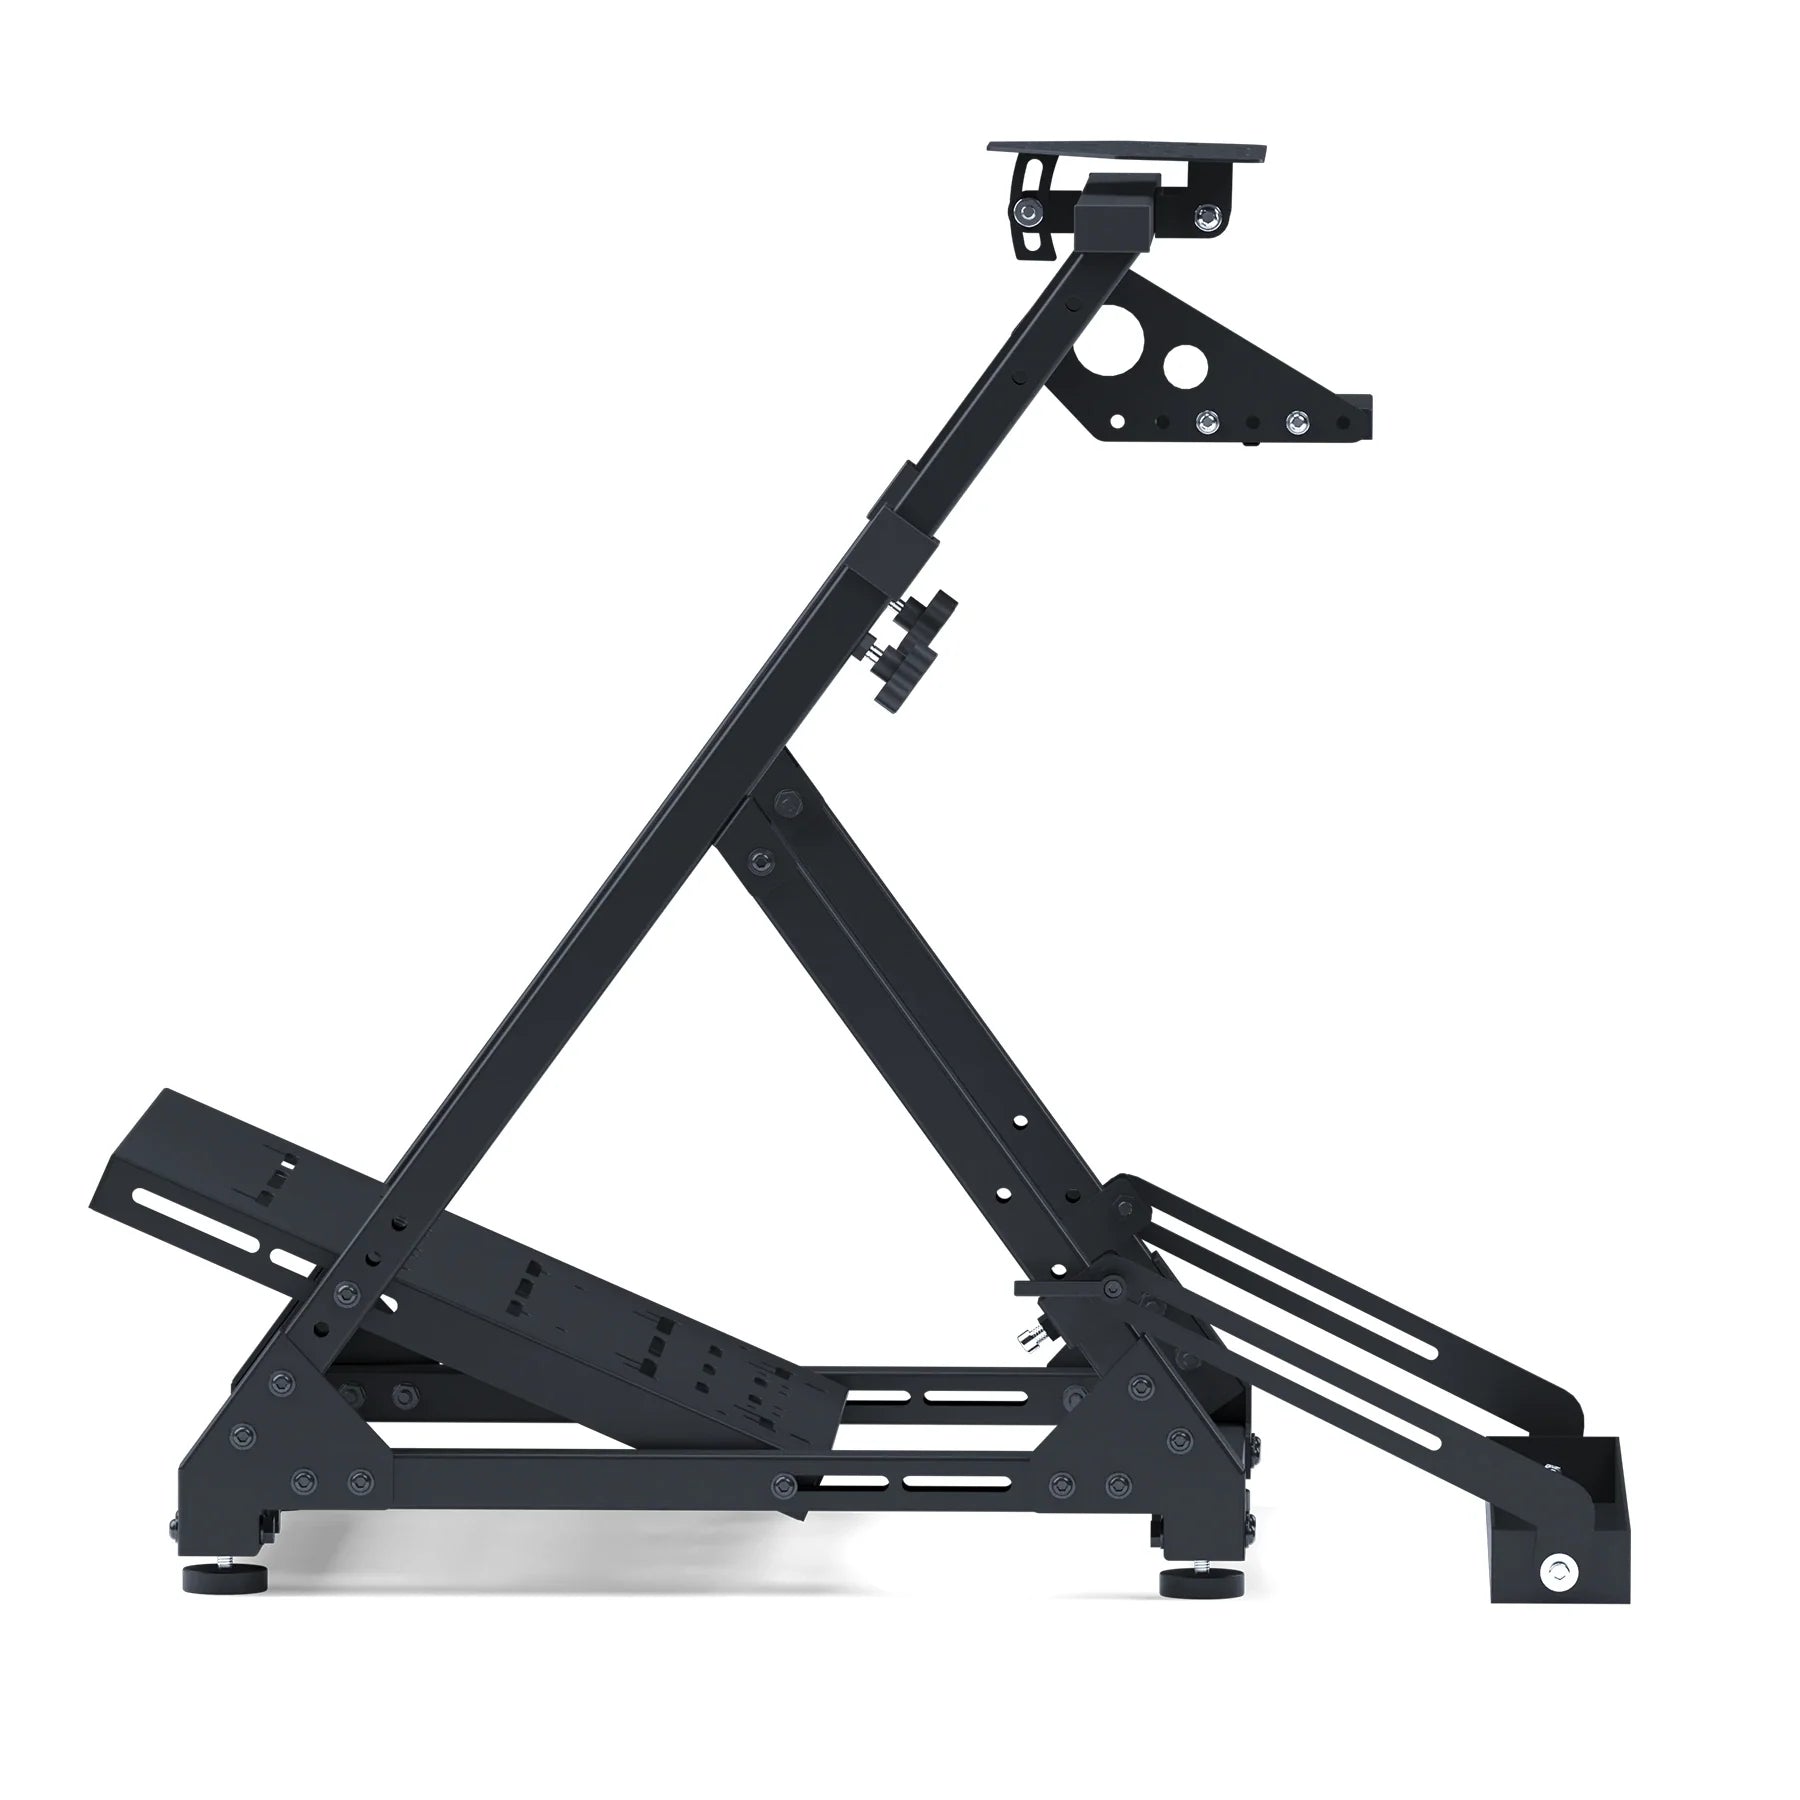 DD-X Steering Wheel Stand side view